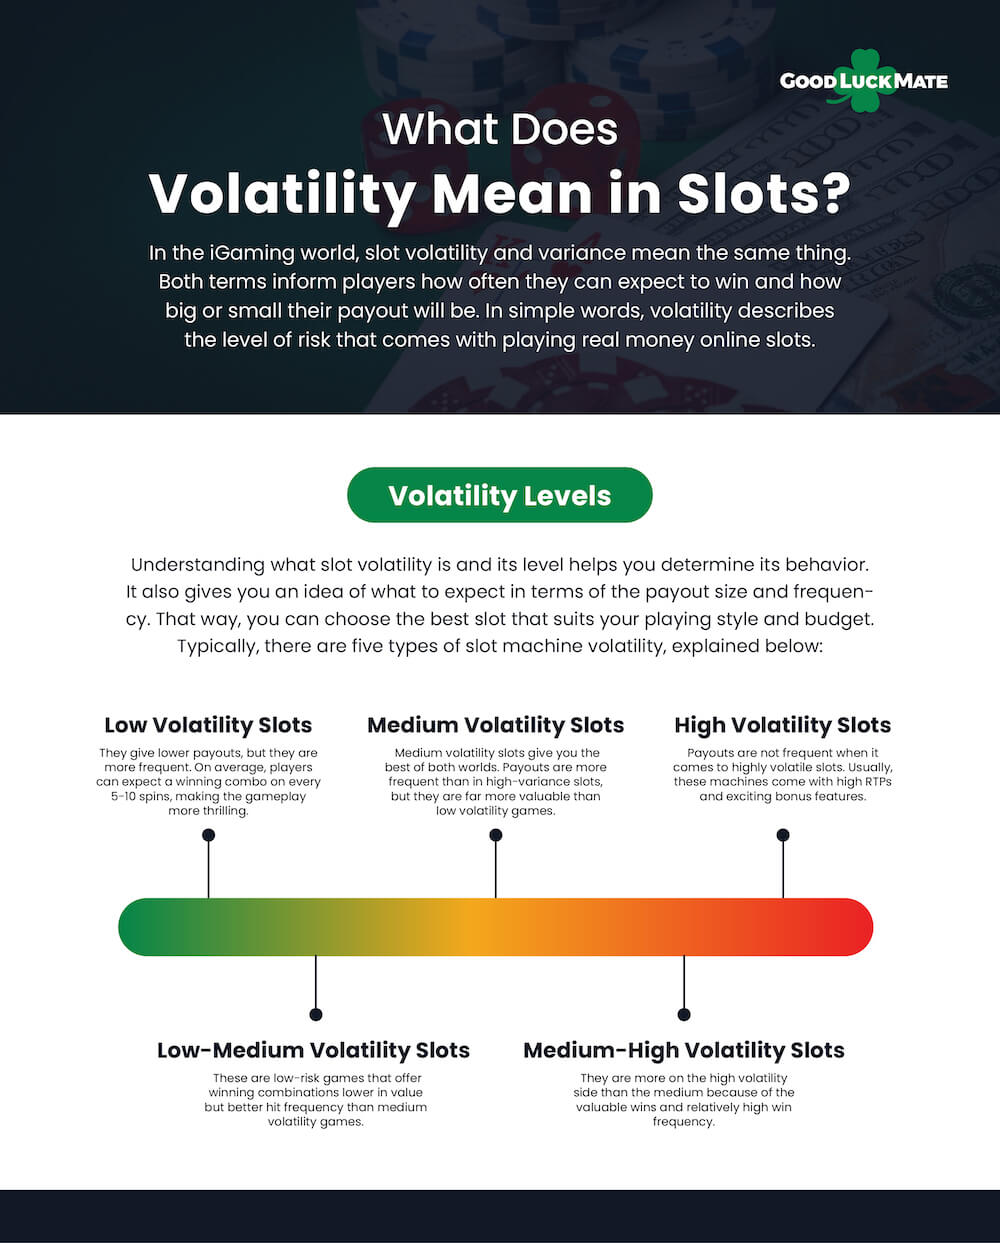 Is it better to play low or high volatility slots?